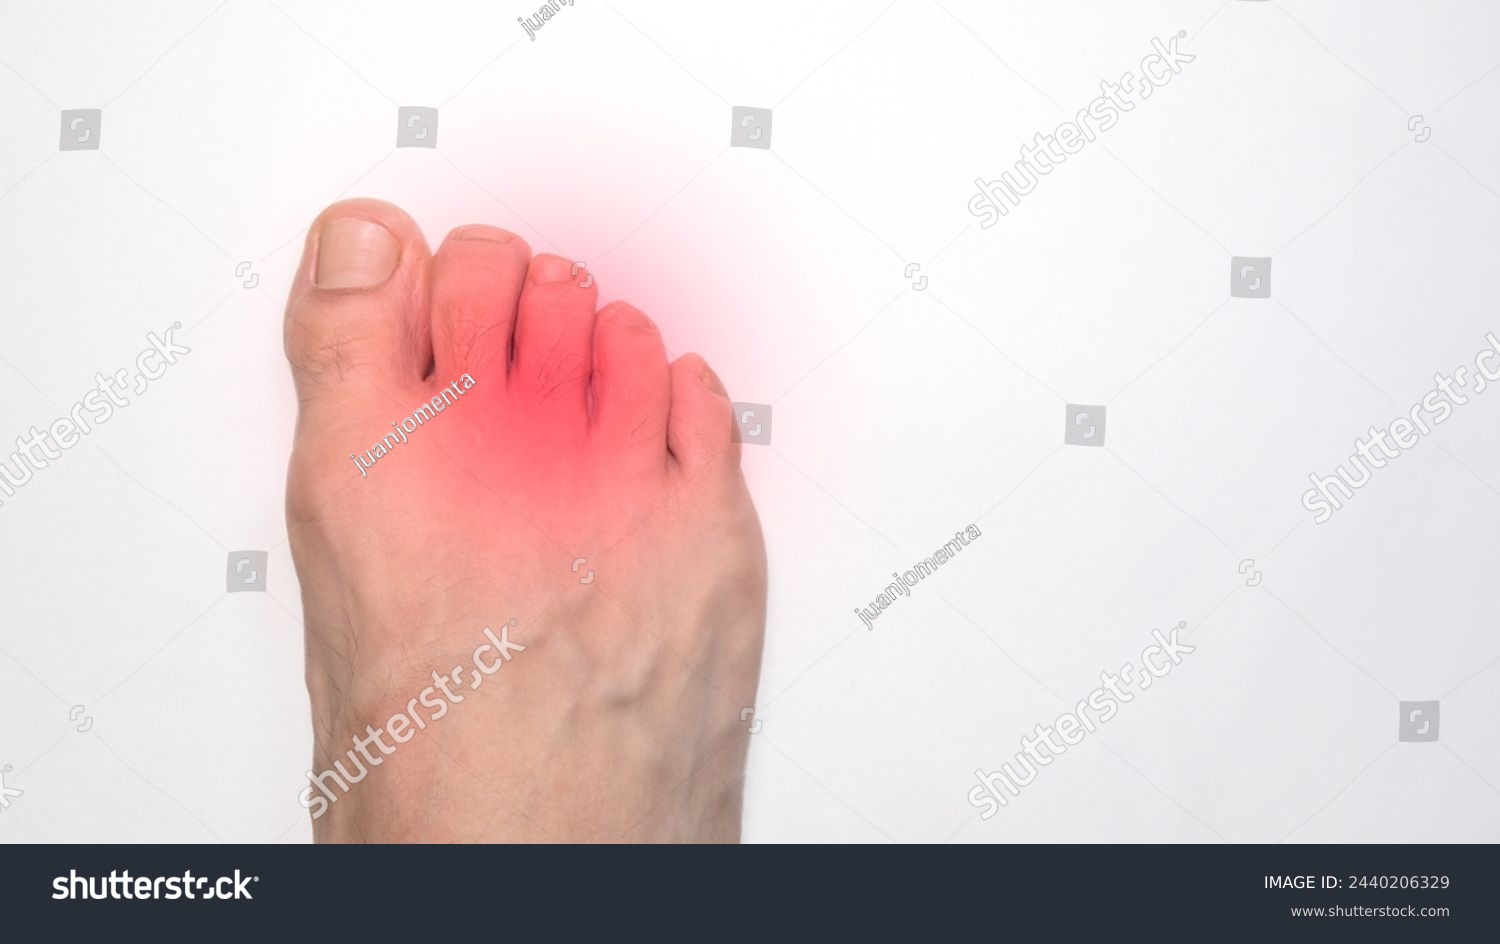 A Right foot toes of a person with a red mark representing pain #2440206329